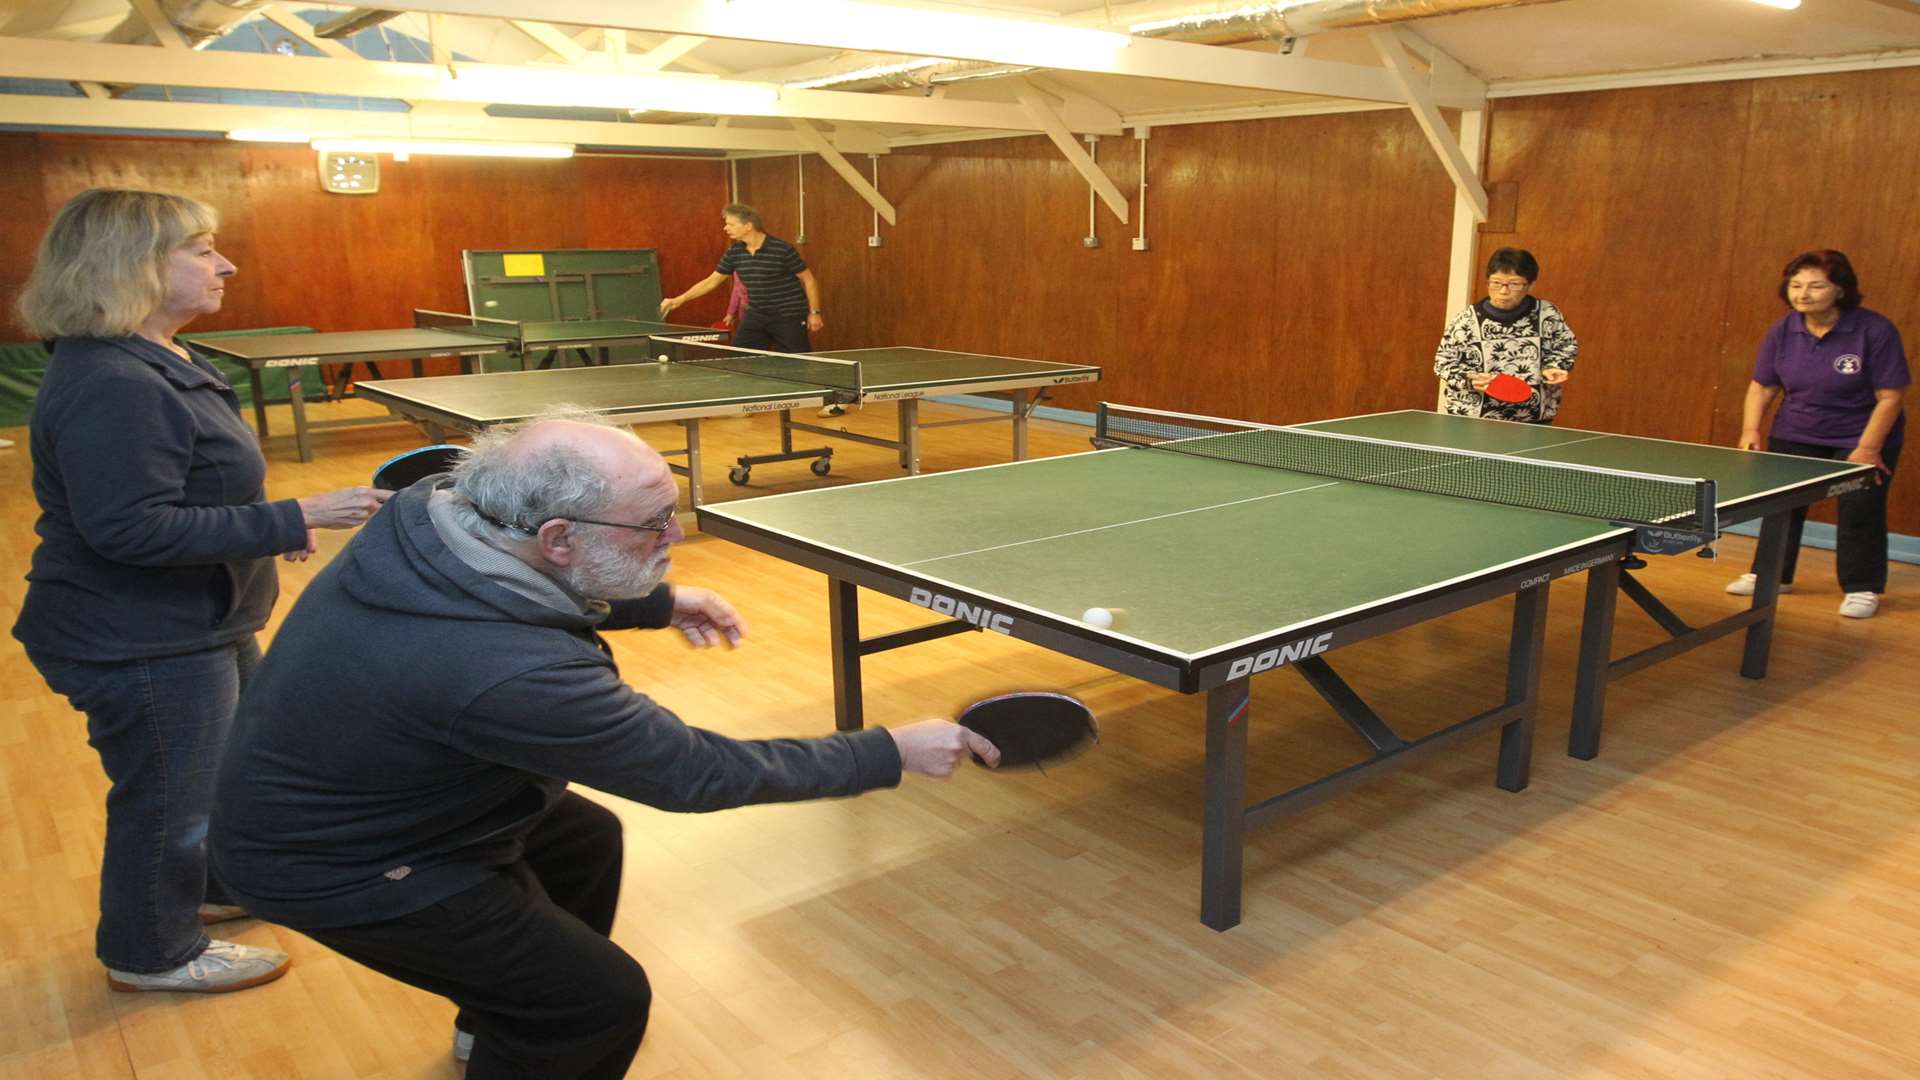 The Meopham Table Tennis Club at their dilapidated building that has been awarded £49,500 for refurbishment from the National Lottery.